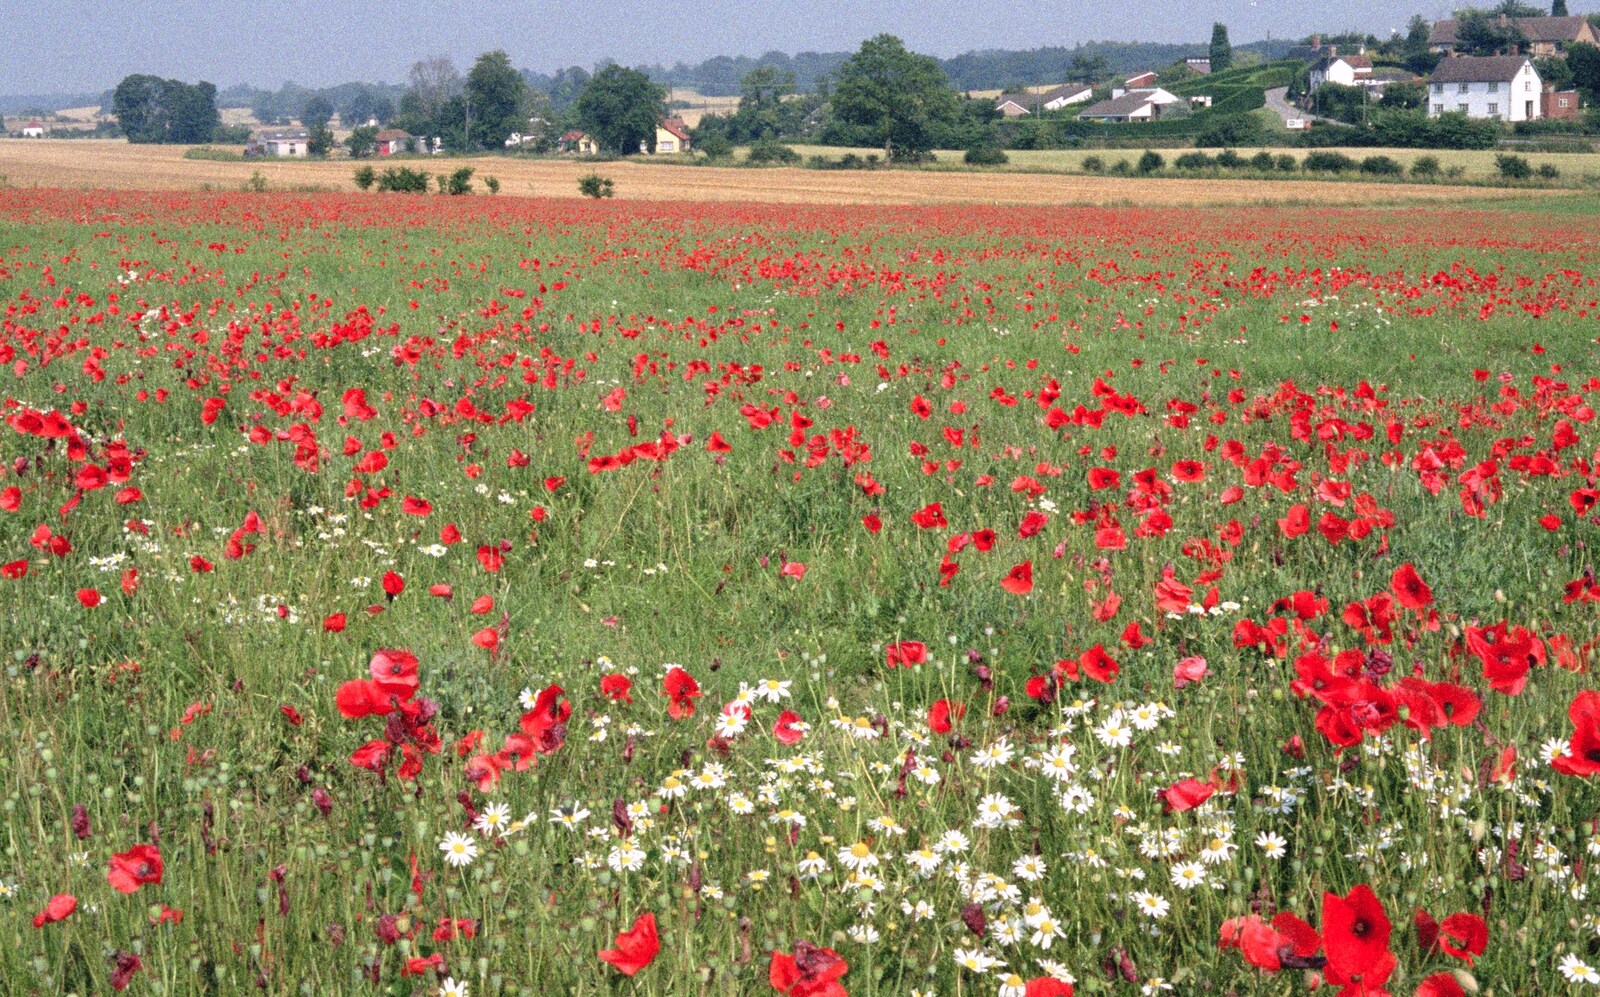 A striking contrast of daisies and poppies from Nosher Leaves BPCC Business Magazines, Colchester, Essex - 18th July 1991